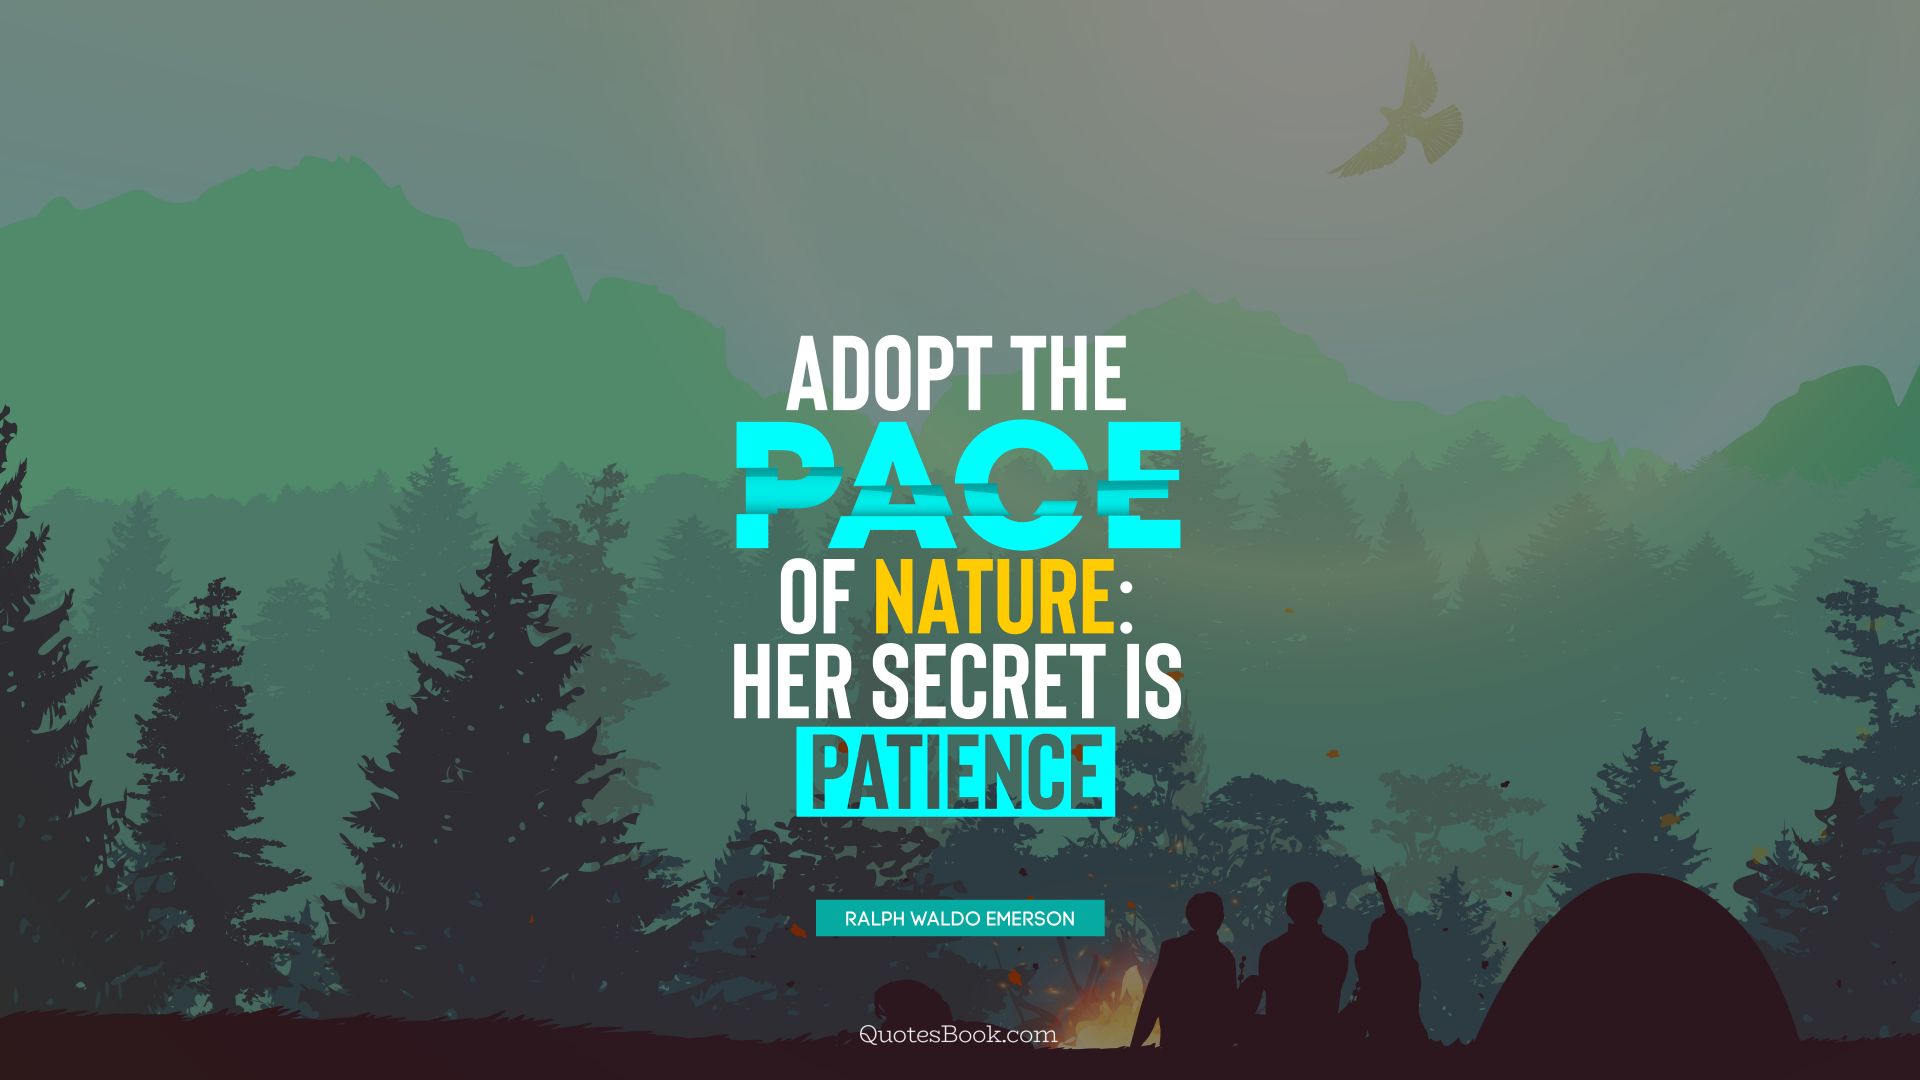 Adopt the pace of nature: her secret is patience. - Quote by Ralph Waldo Emerson